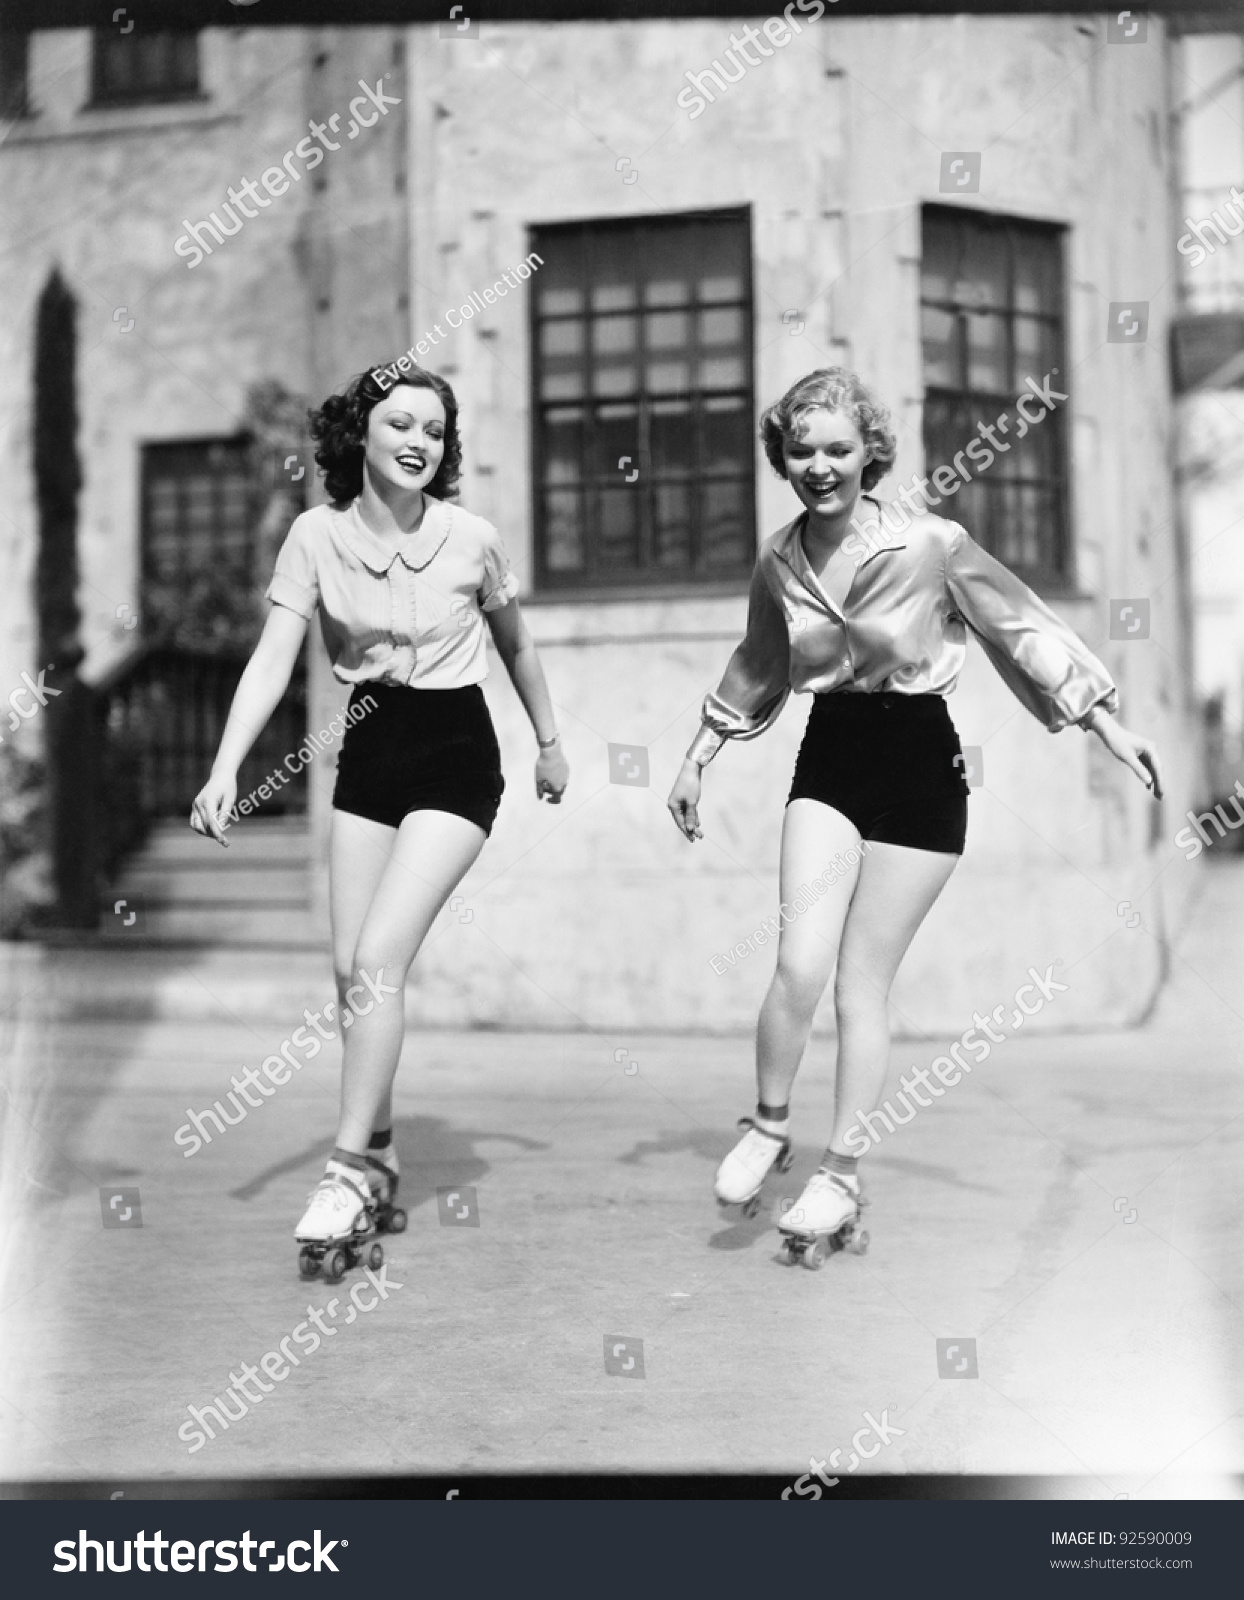 Two Young Women Roller Skating On The Road And Smiling Stock Photo ...